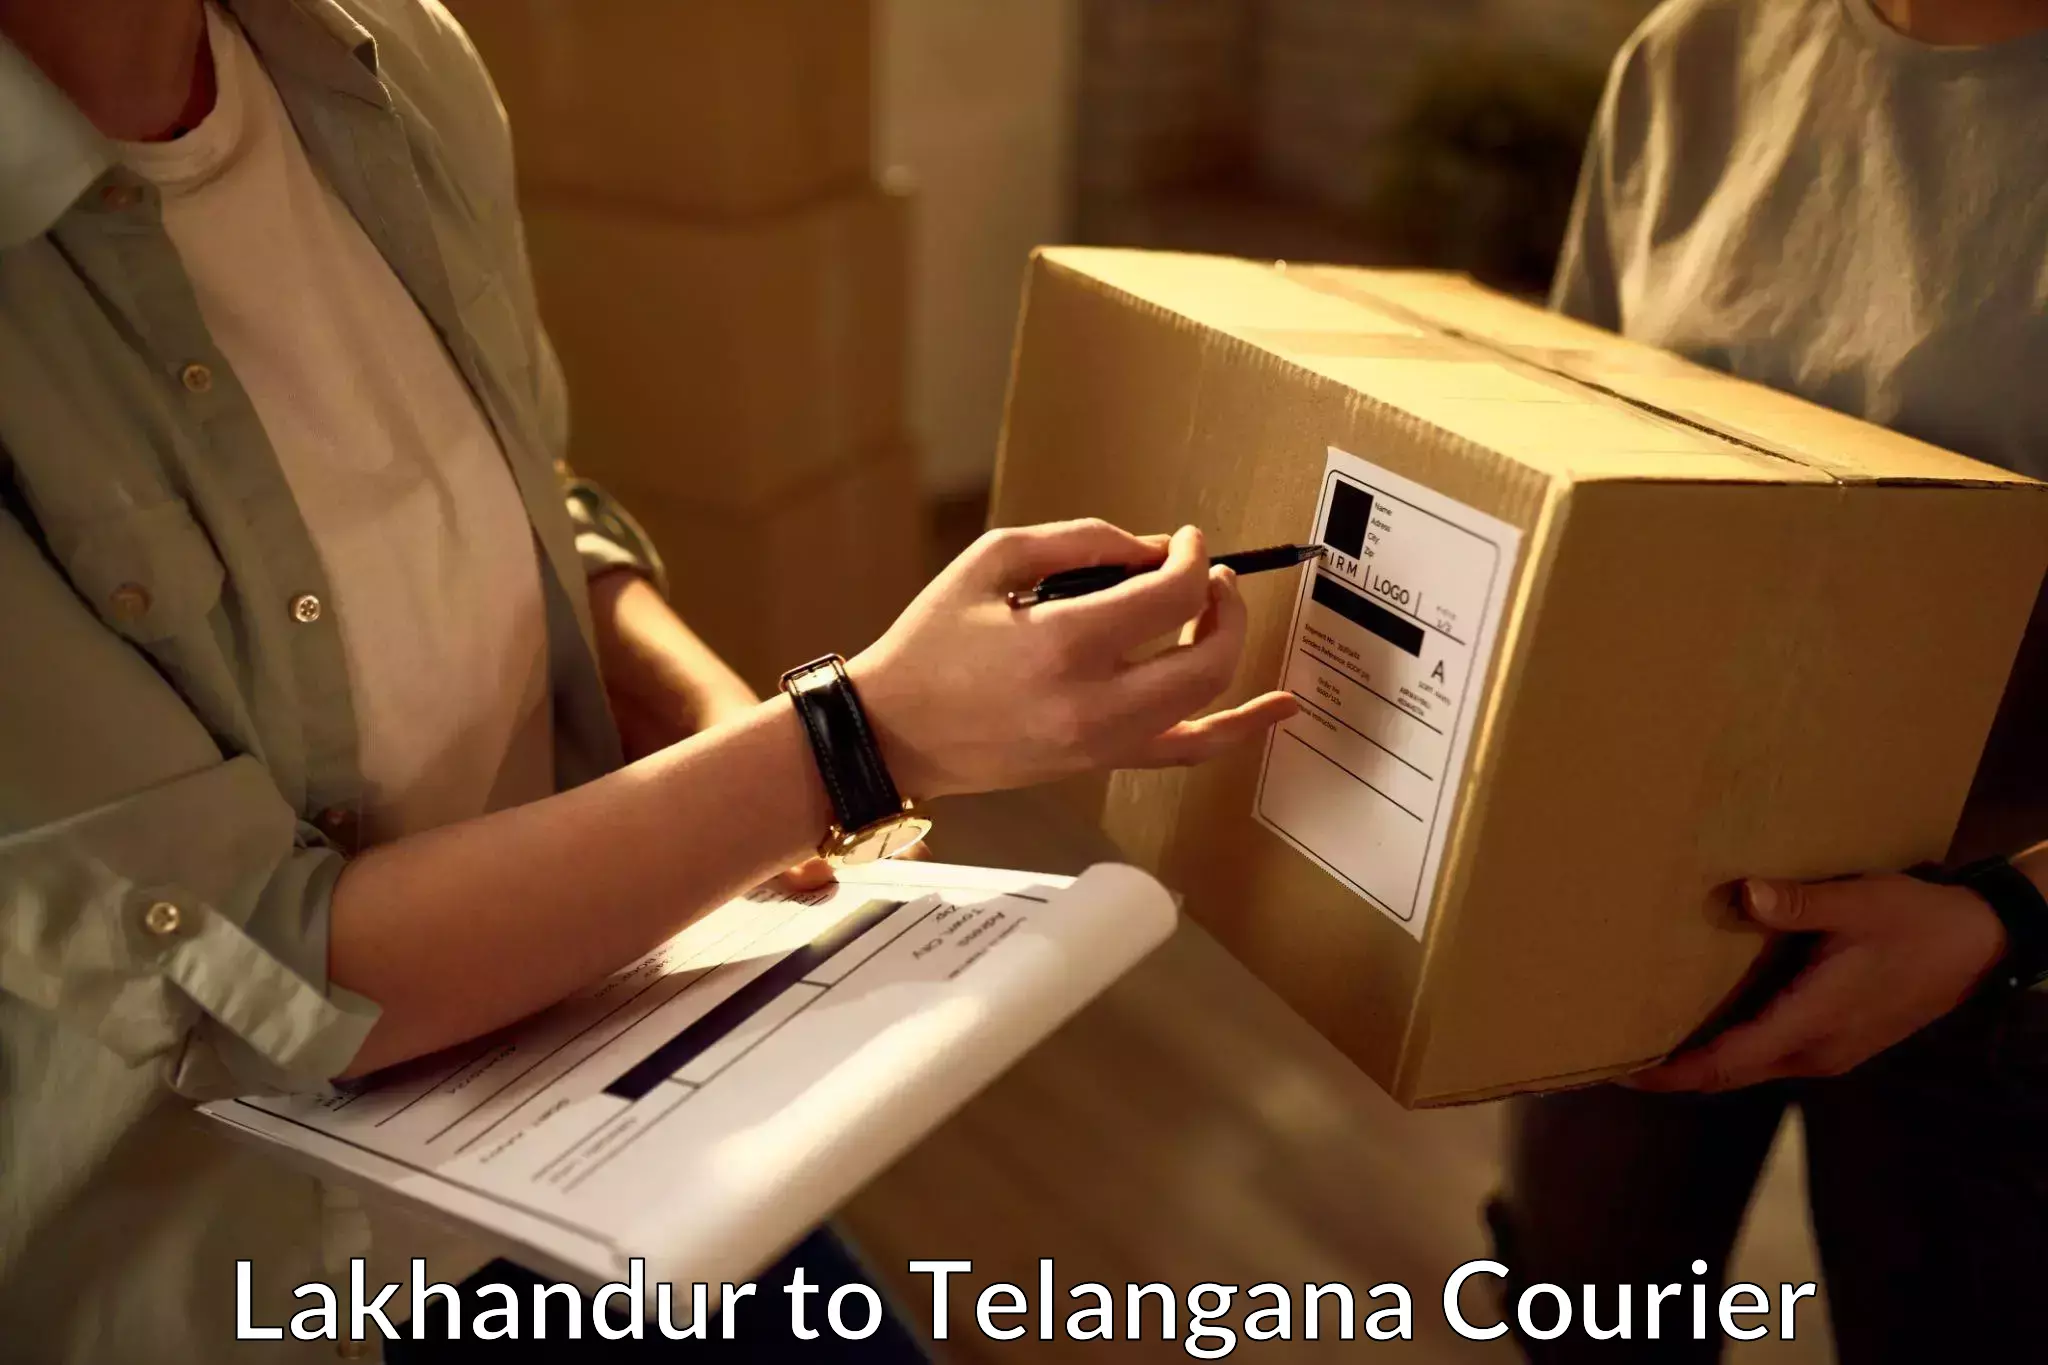 Next day courier in Lakhandur to Bhainsa